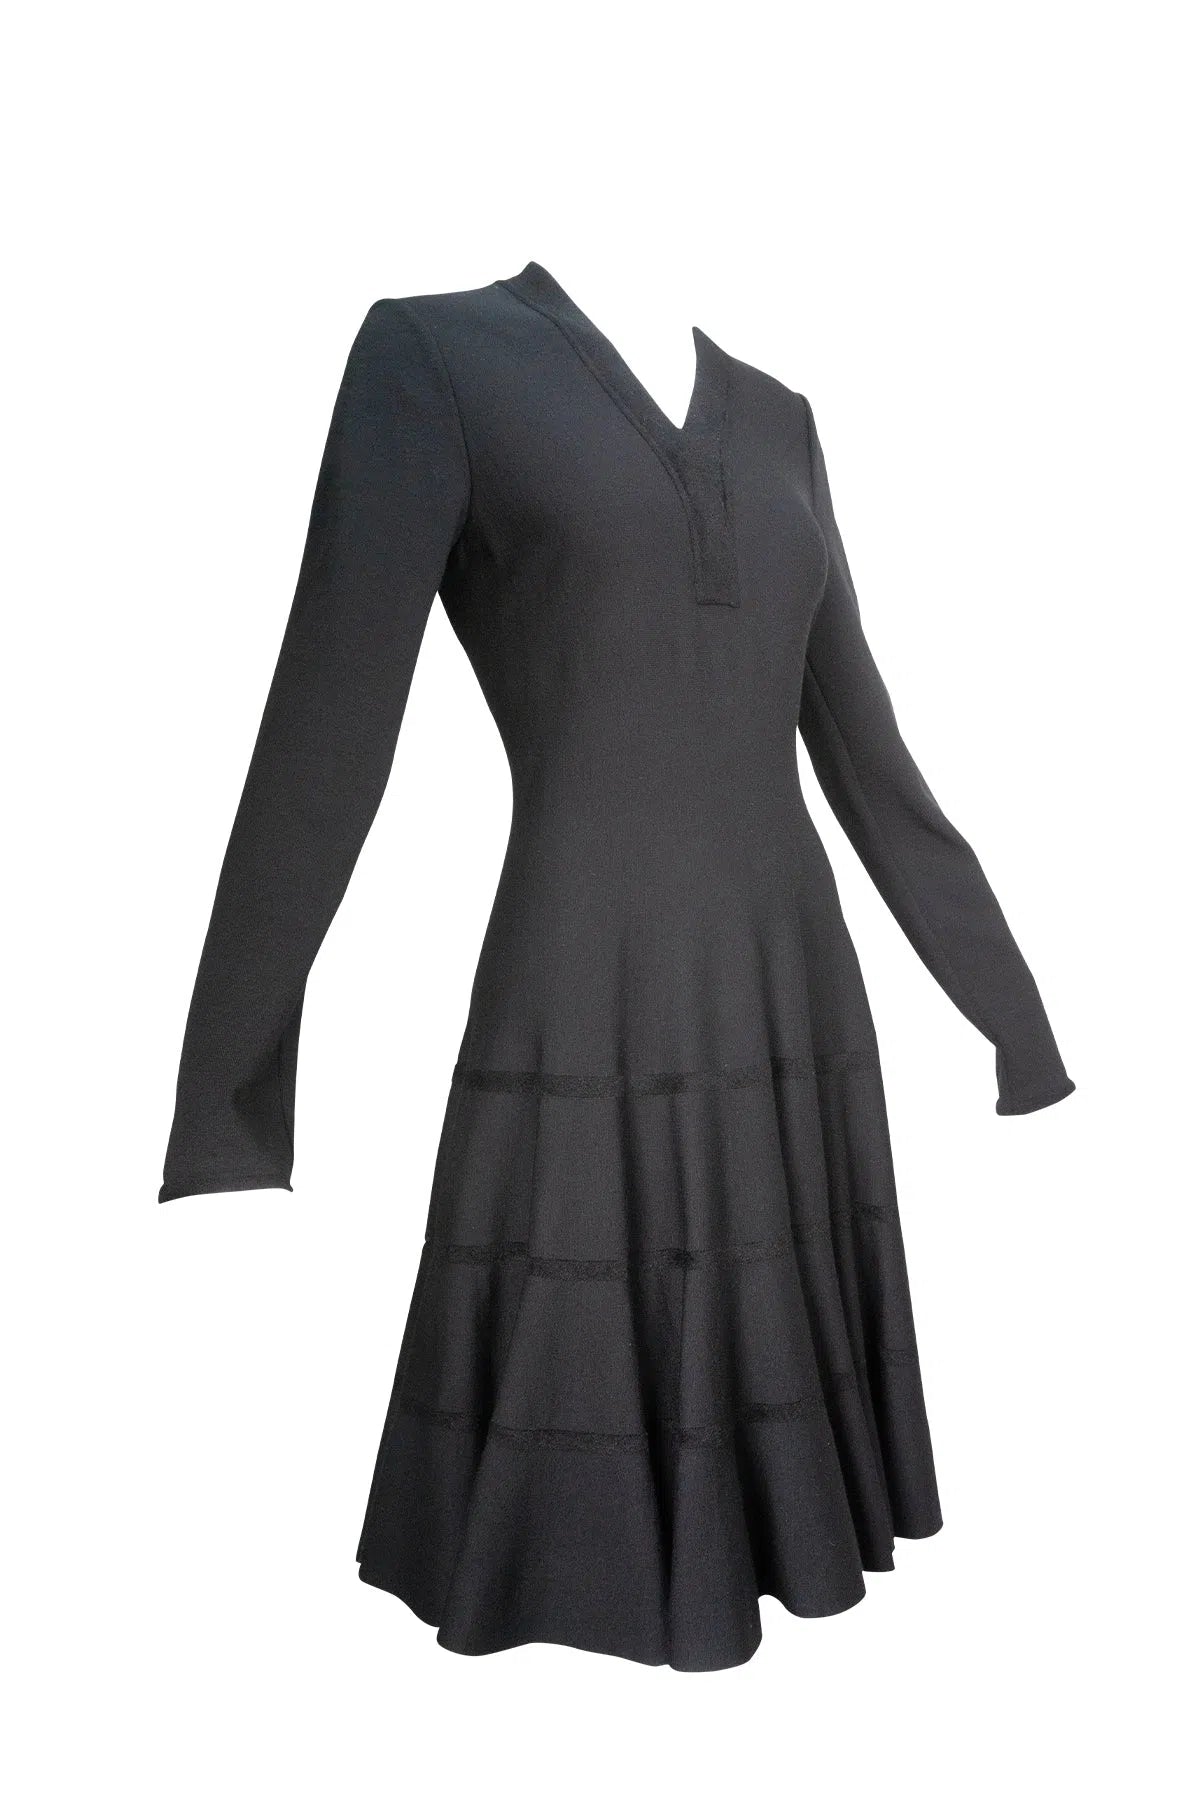 Alaia Size 44 Black Fit Flare Skater Long Sleeve Dress - Foxy Couture Carmel